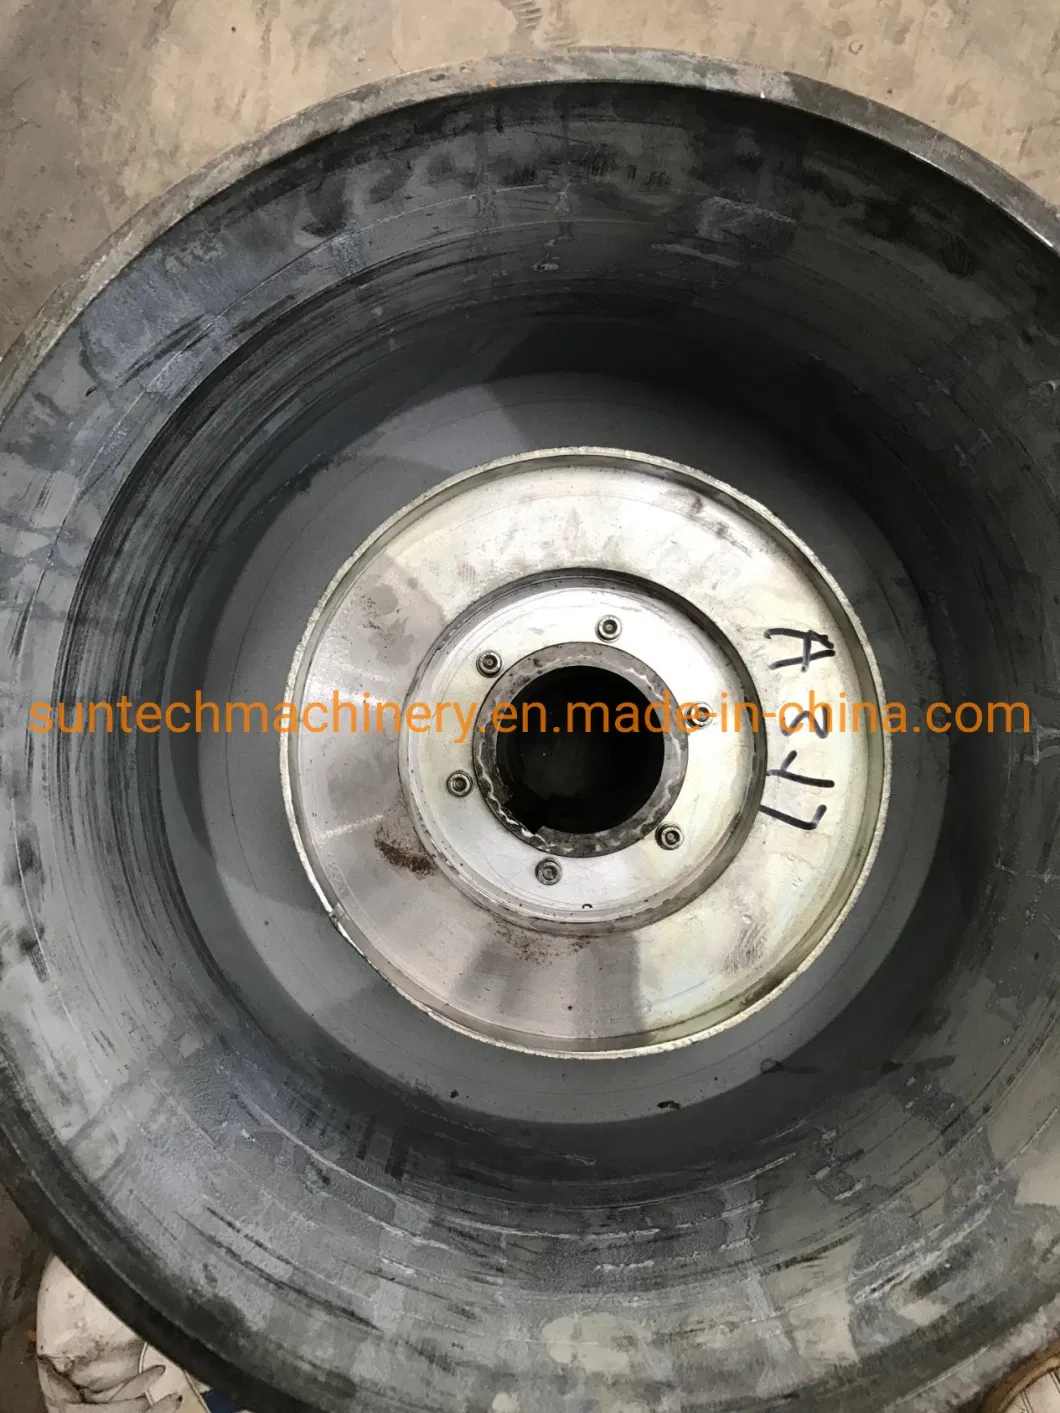 Suntech Tungsten Carbide Steel Wire Drawing Capstan Block Drum for Straight Line Dry Type Pulley Type Wire Drawing Machine